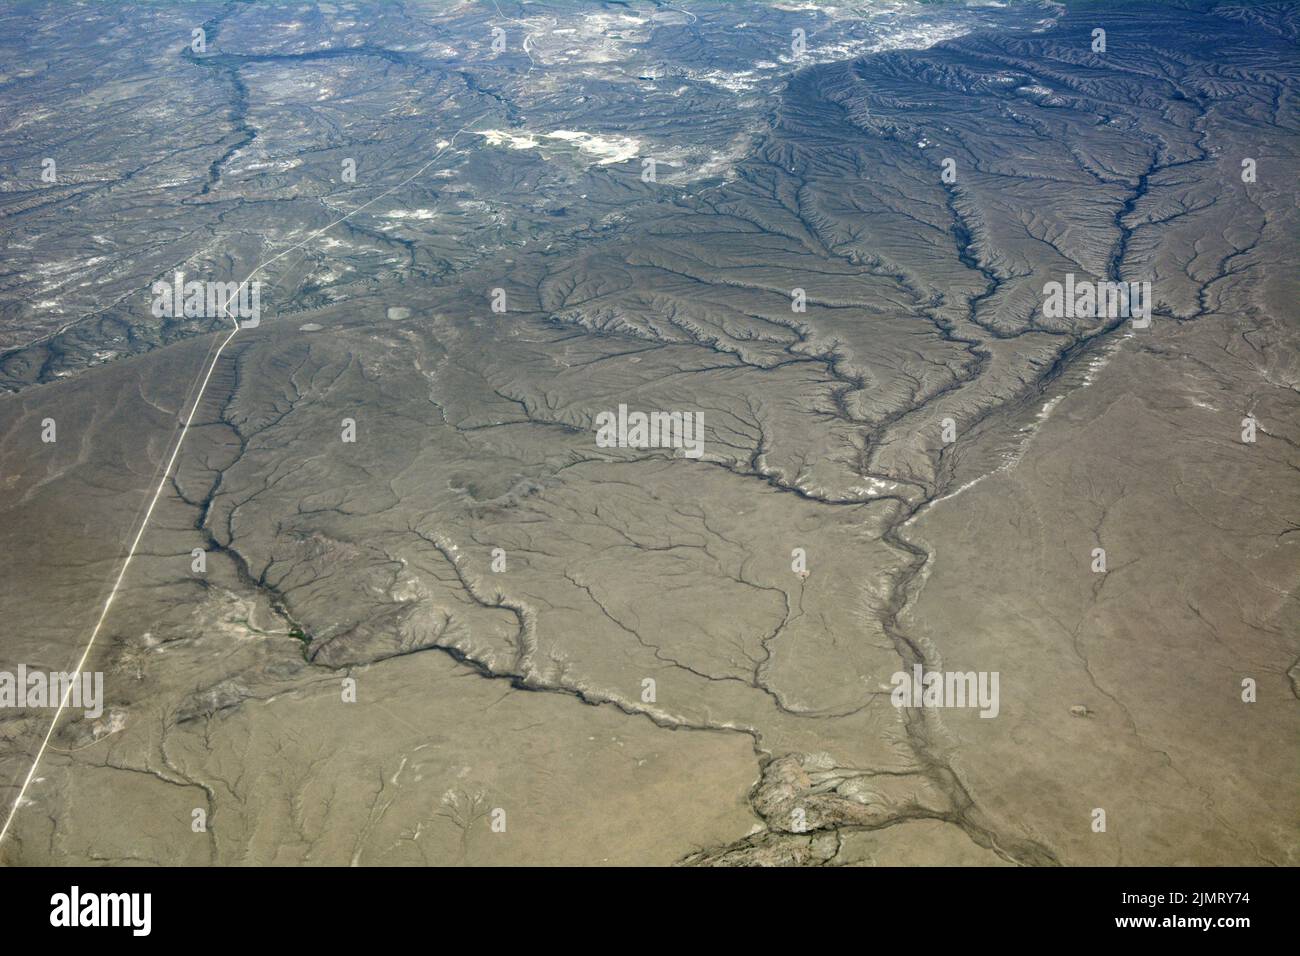 River and drainage systems veins in the semi-arid high desert of Carbon County, Wyoming, United States. Stock Photo